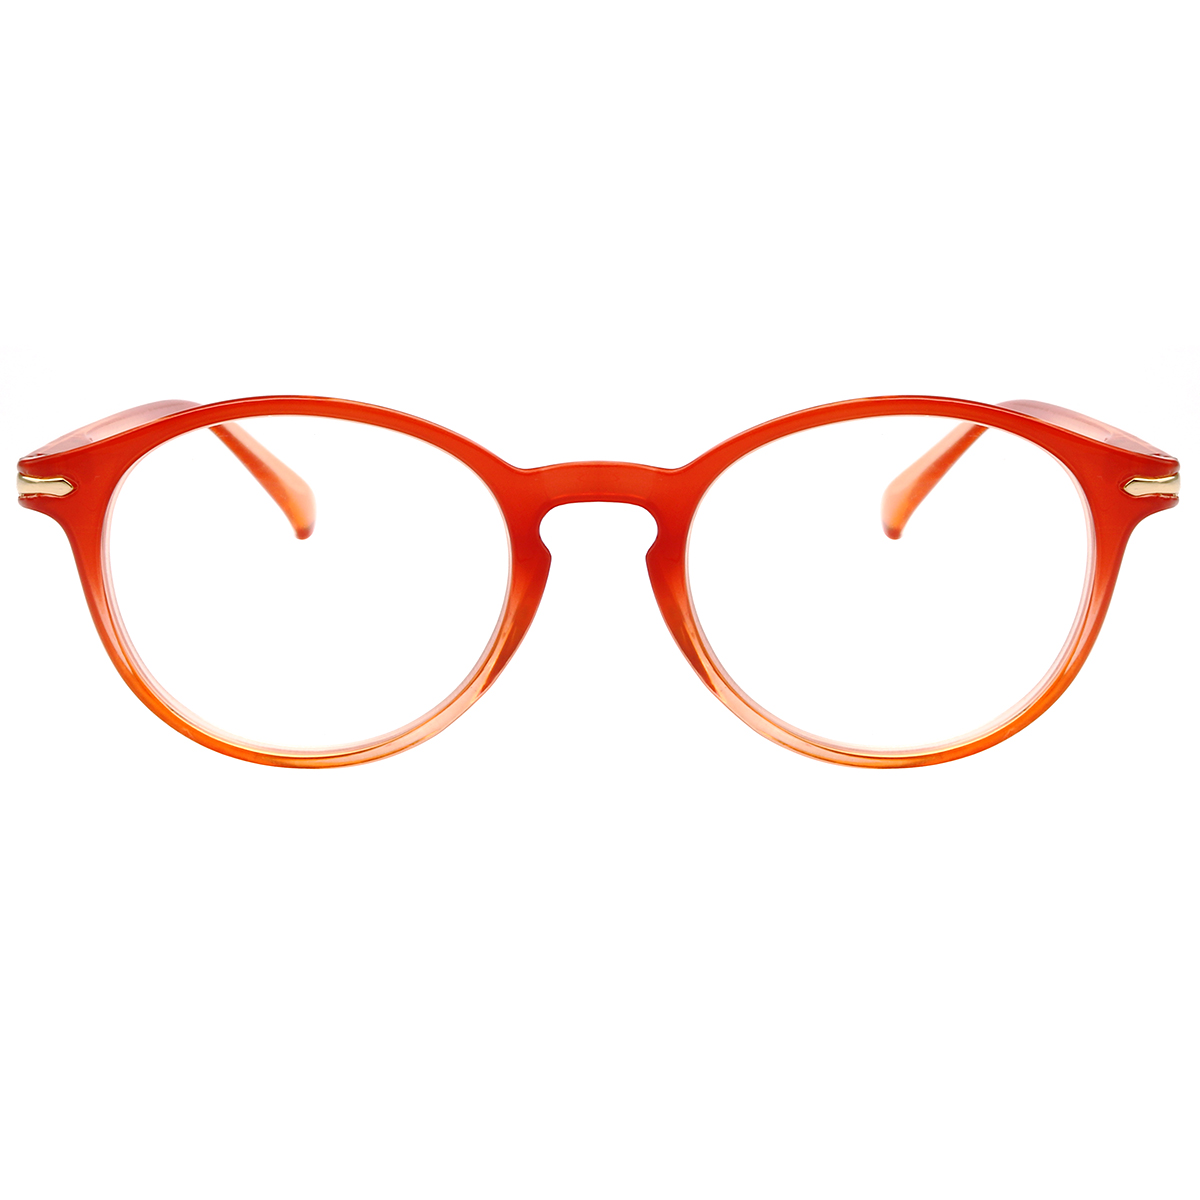 oval reading-glasses #511 - red